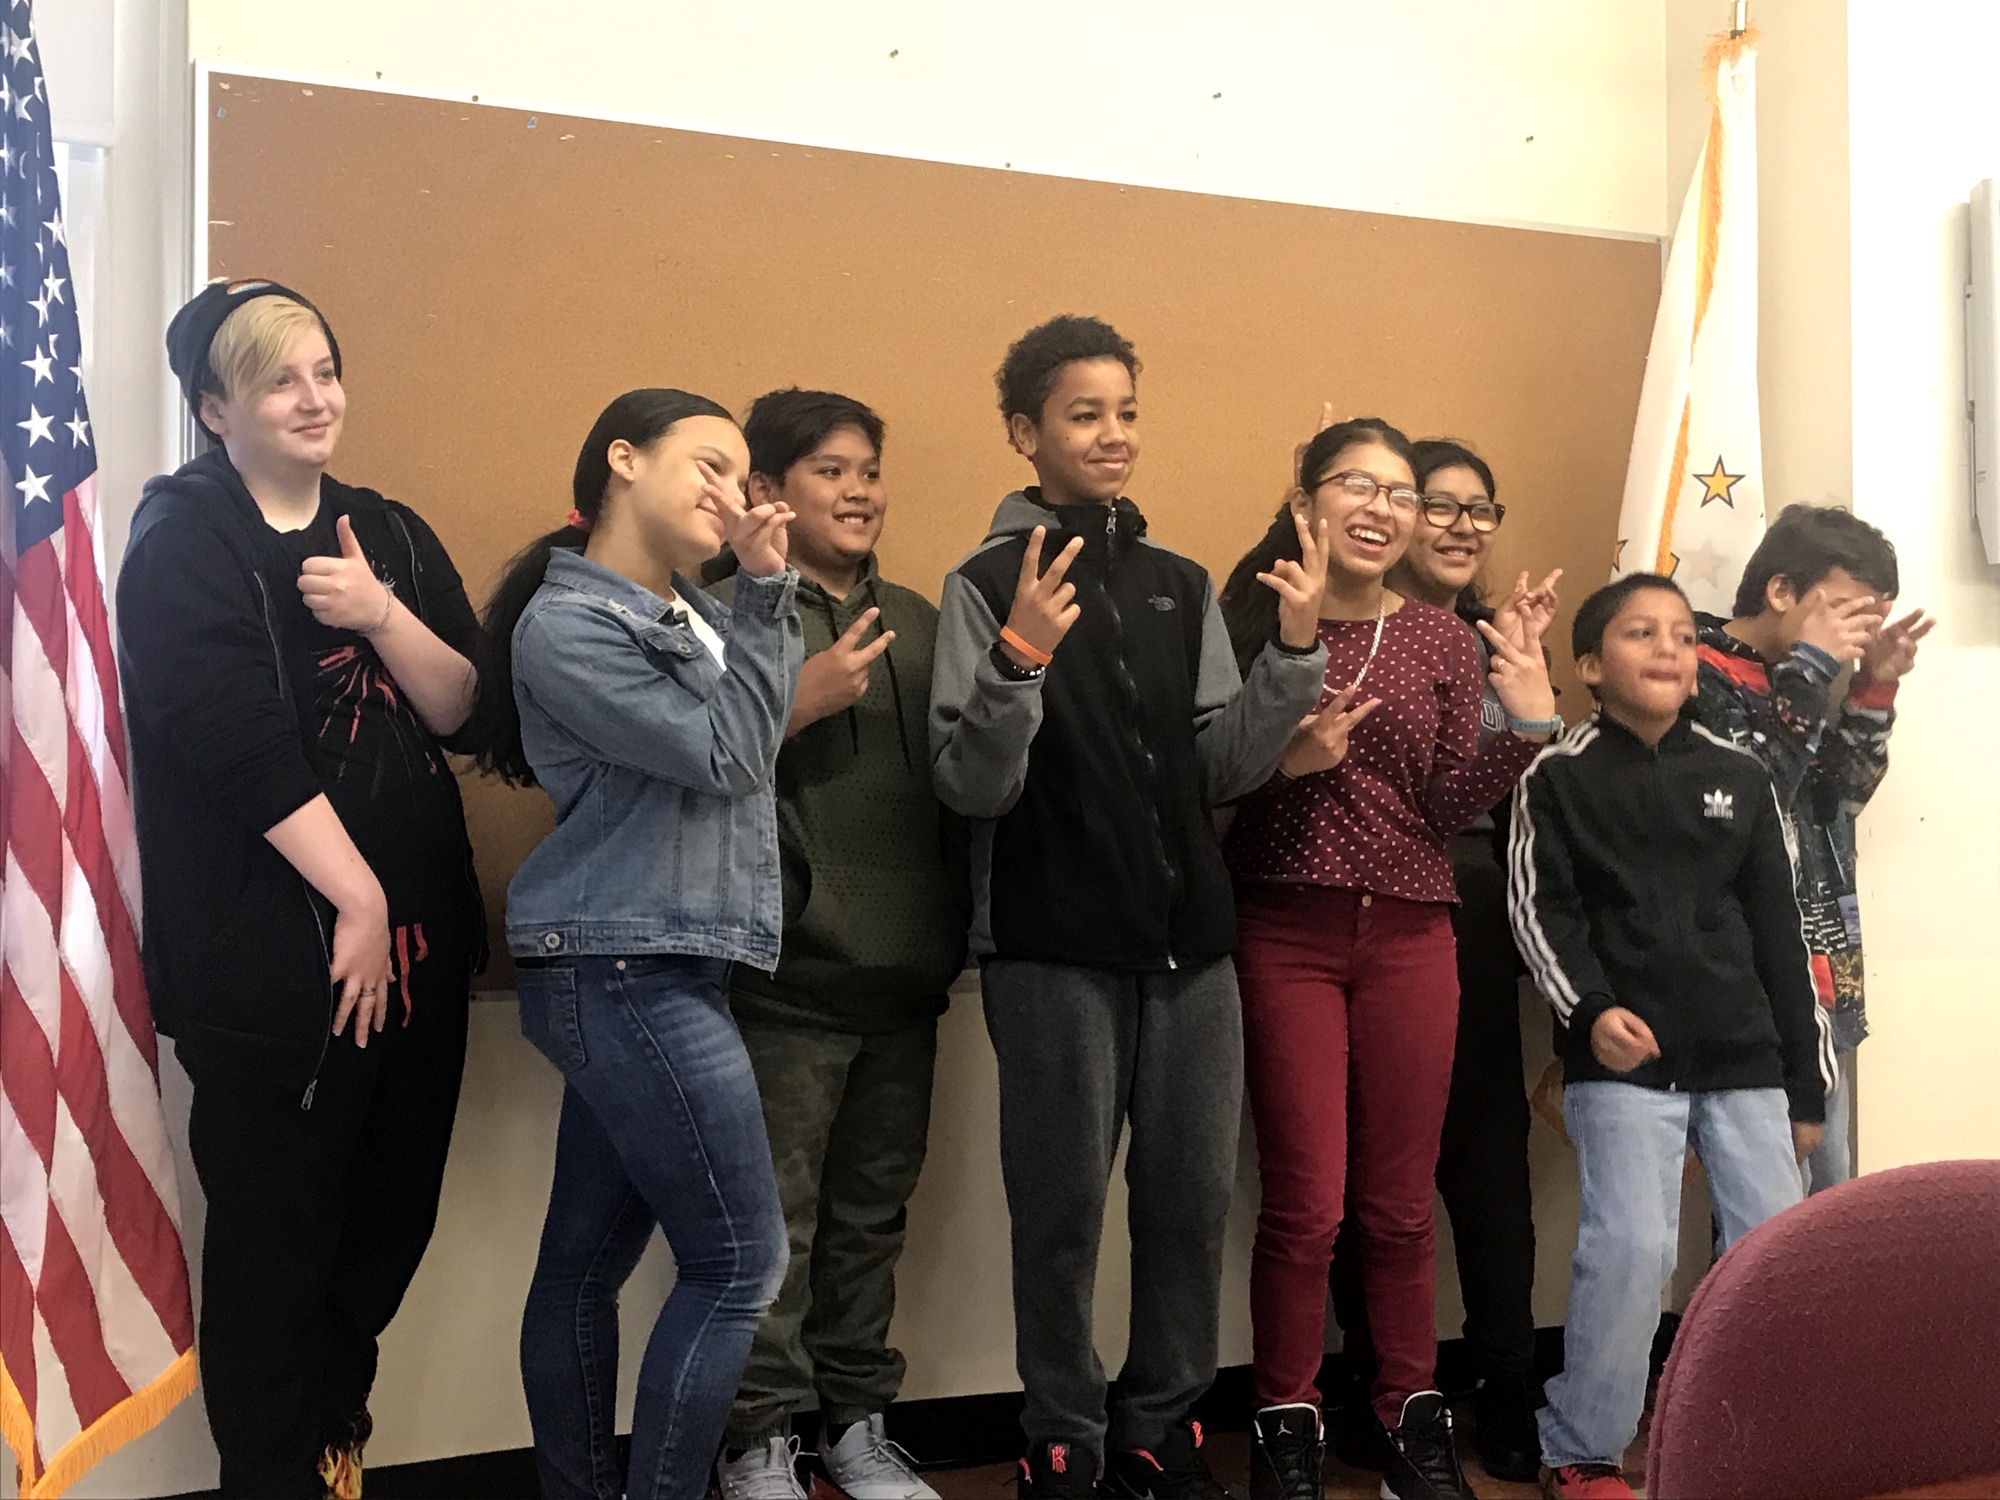  Some of the 15 newly elected members of West Broadway Middle School’s first National Student Council 